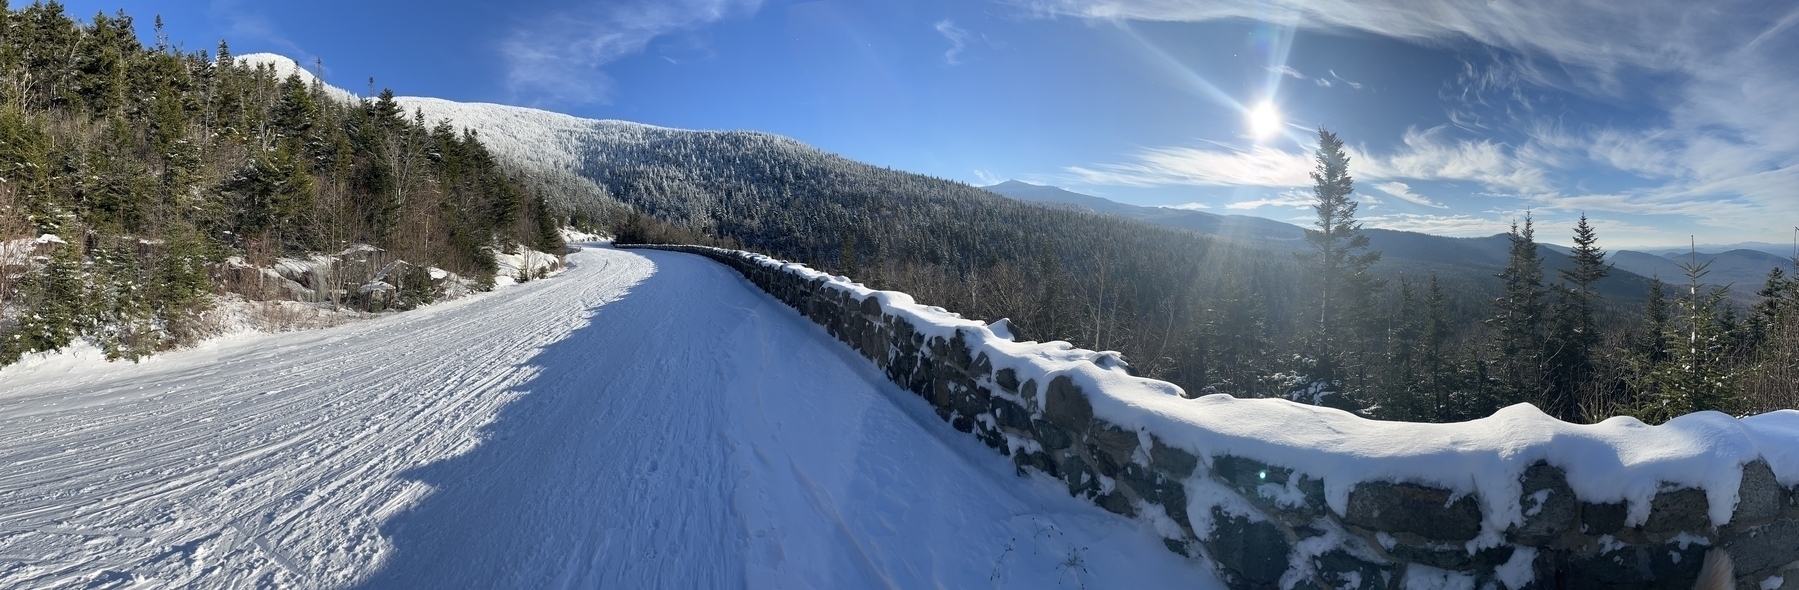 Panorama of a snowy mountain road with a castle at the top.